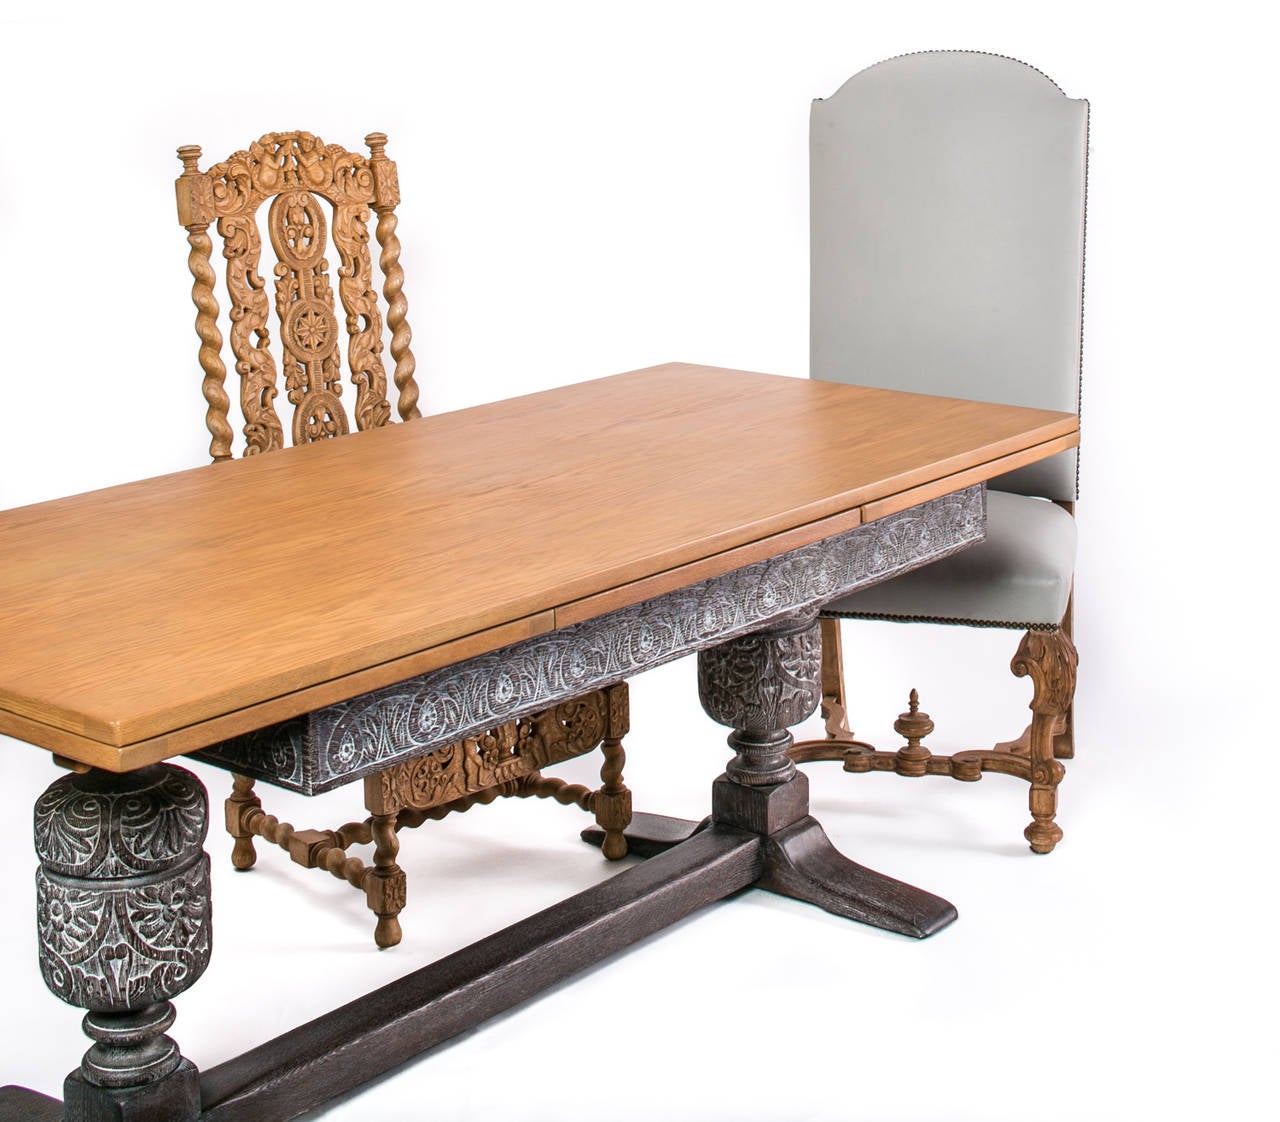 Refectory extendable english baroque dining table with hand carved chairs. Six chairs in black leather and two captain chairs in grey leather.